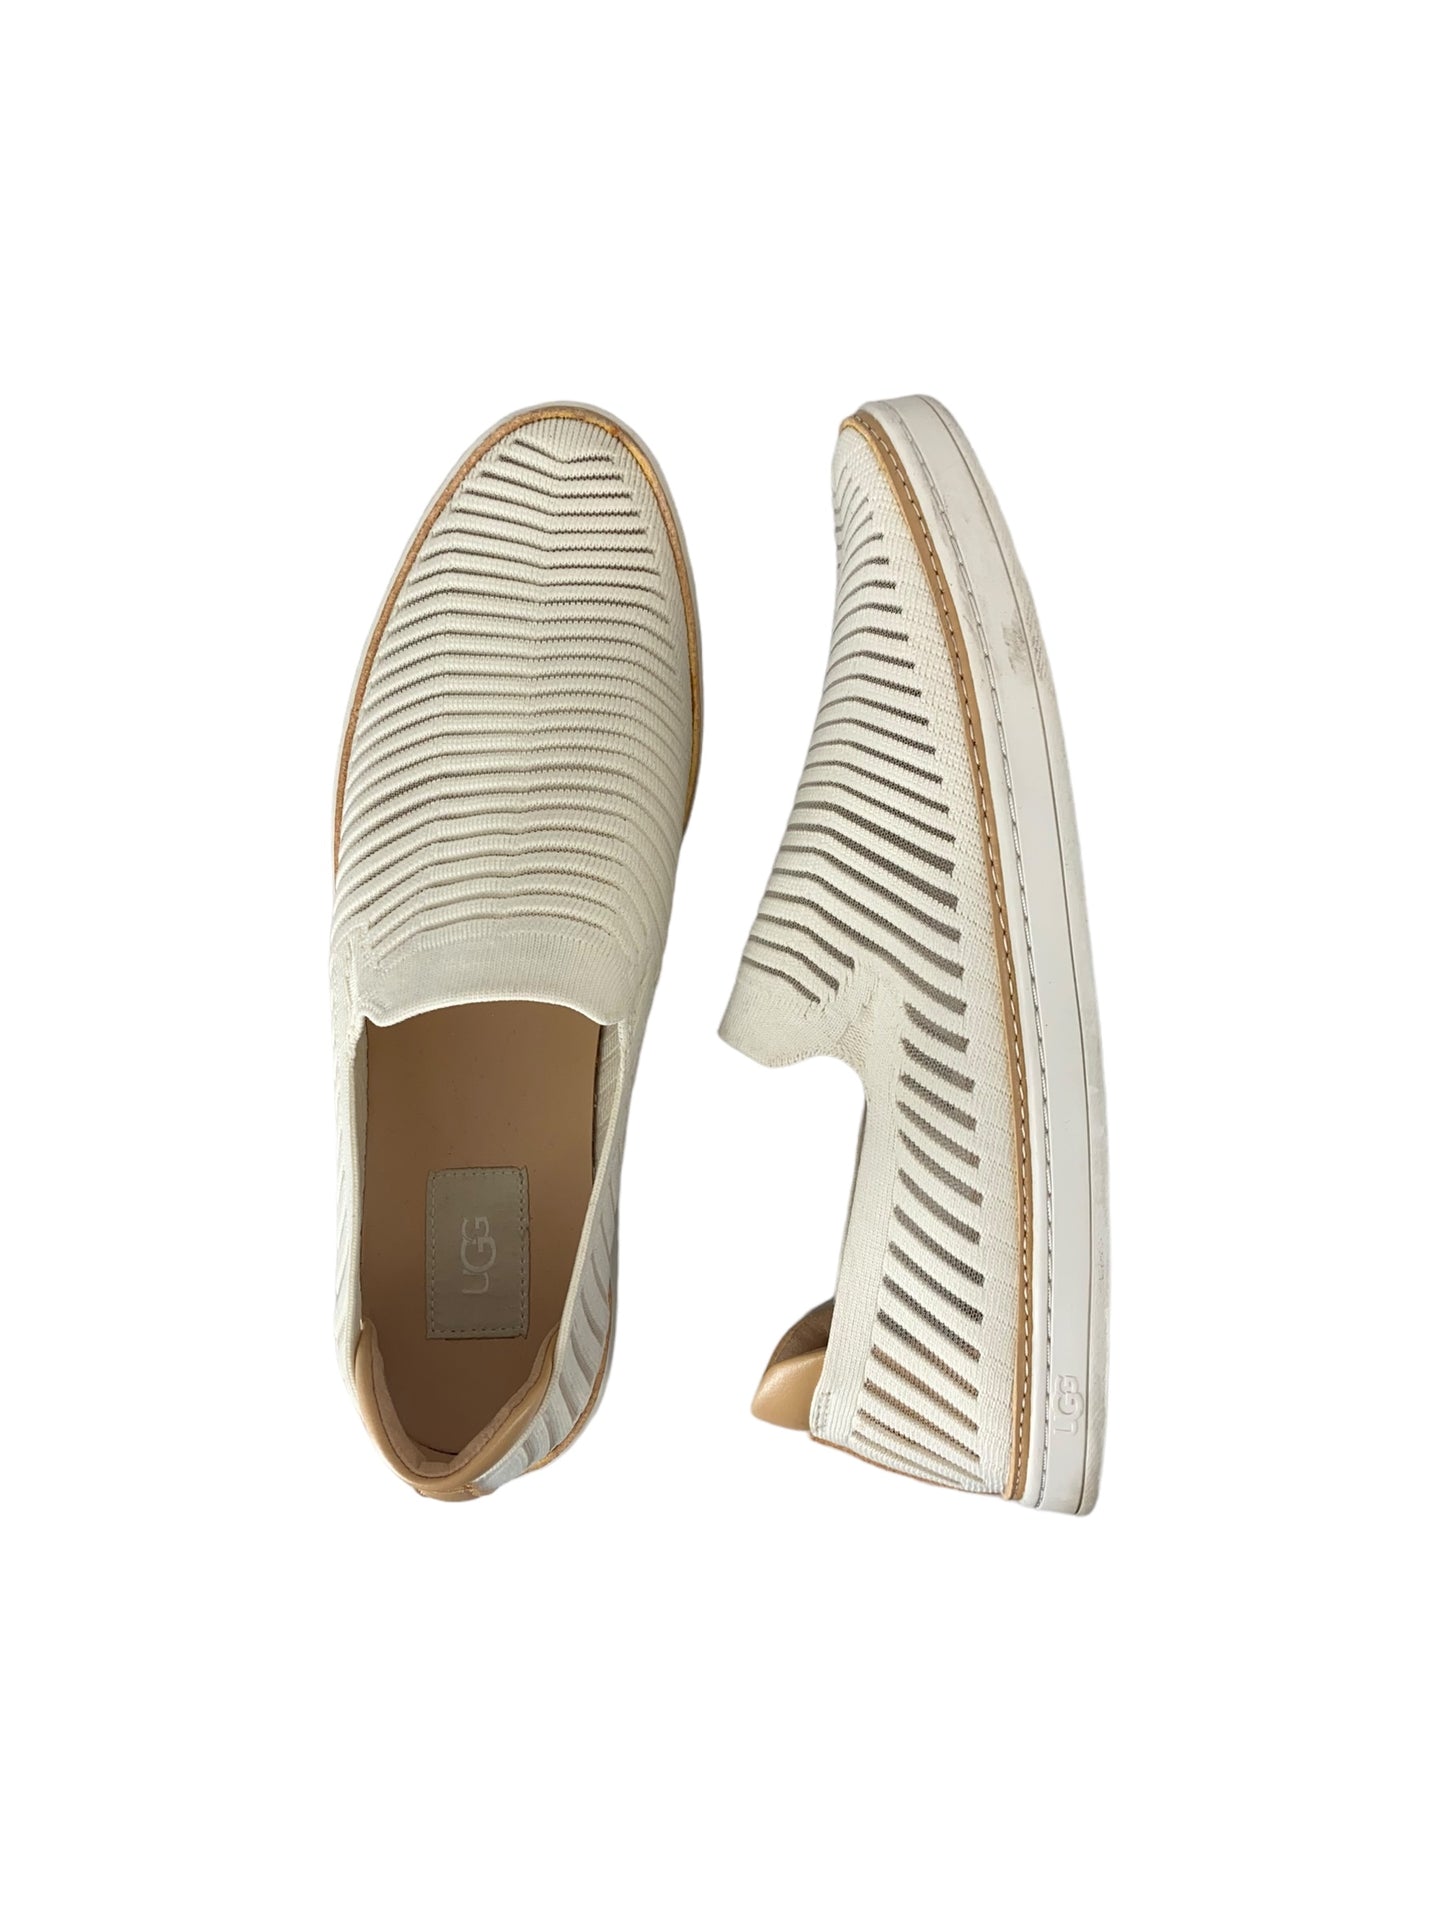 Shoes Flats Boat By Ugg  Size: 11